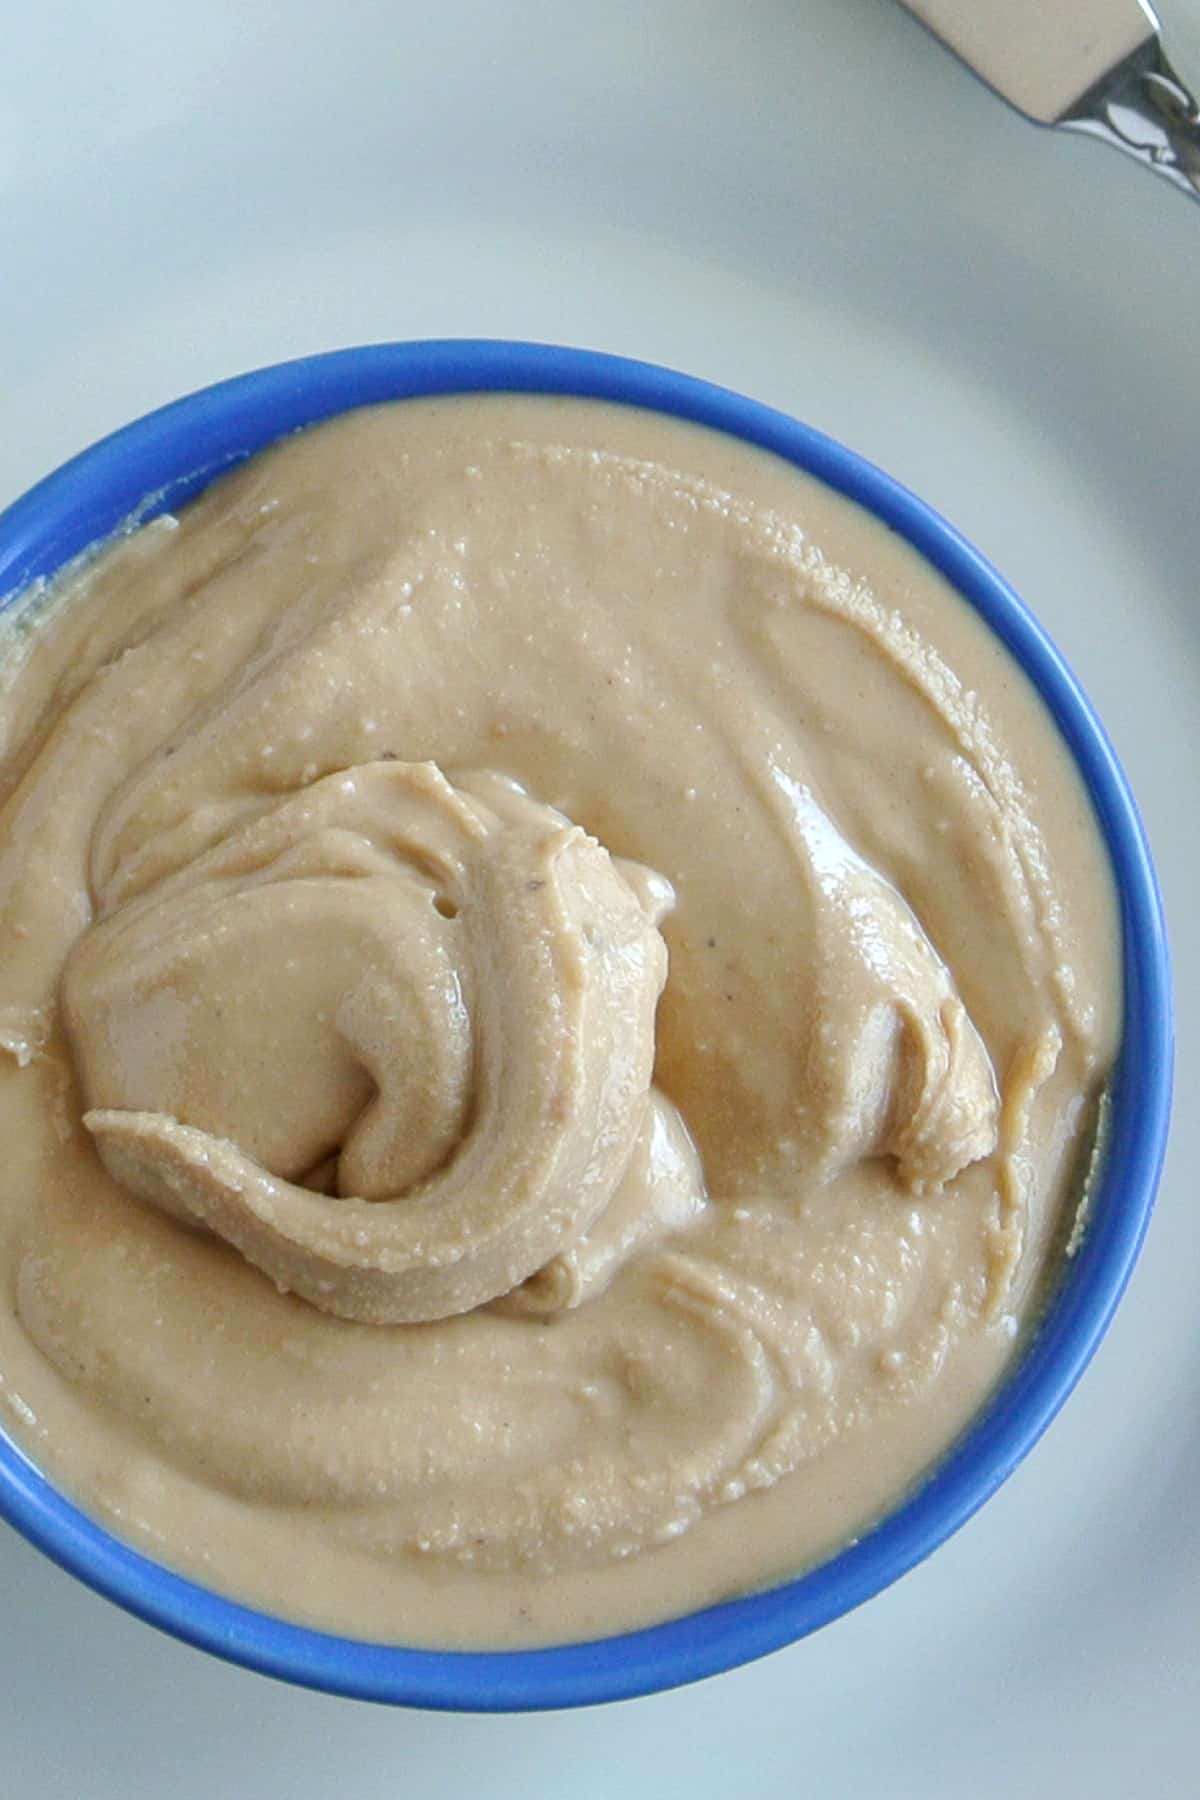 Very close up photo of creamy swirled cashew butter in a blue bowl on a white plate.